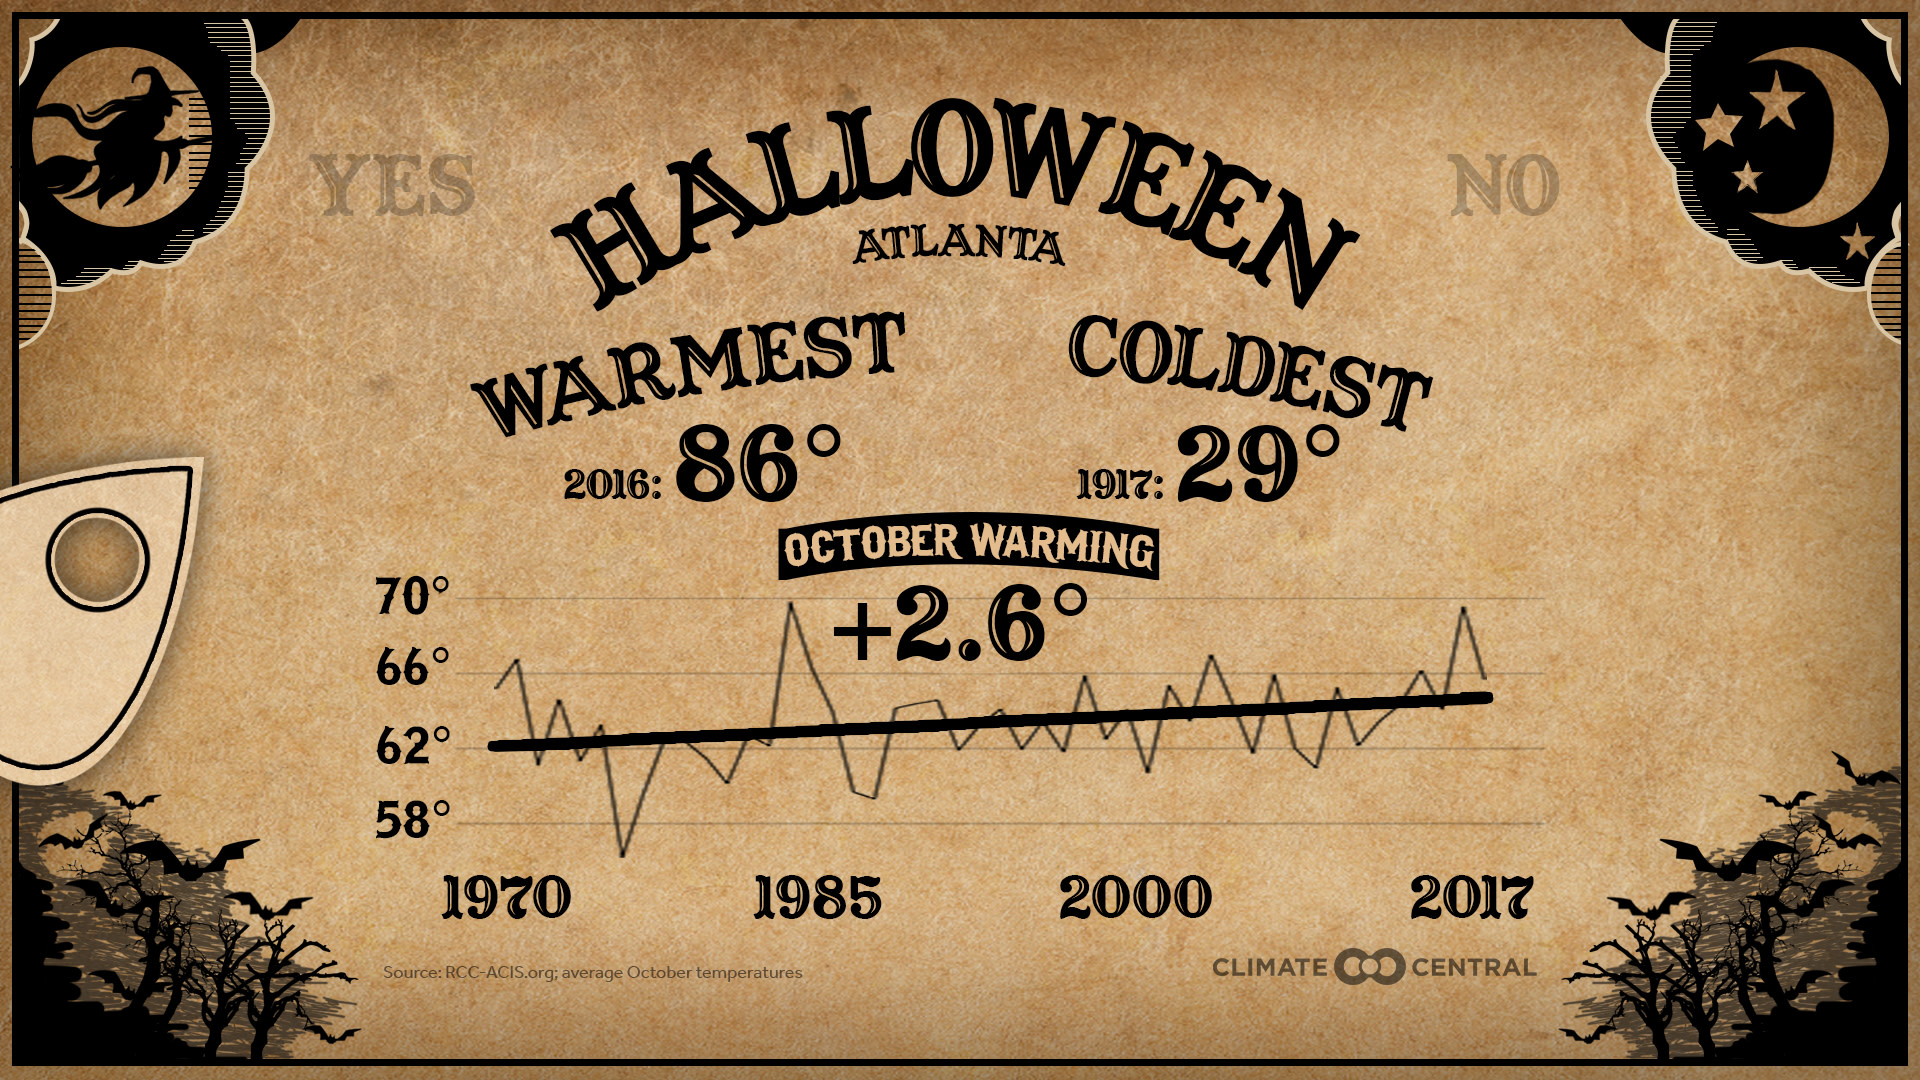 Market - Halloween Extremes & Trends